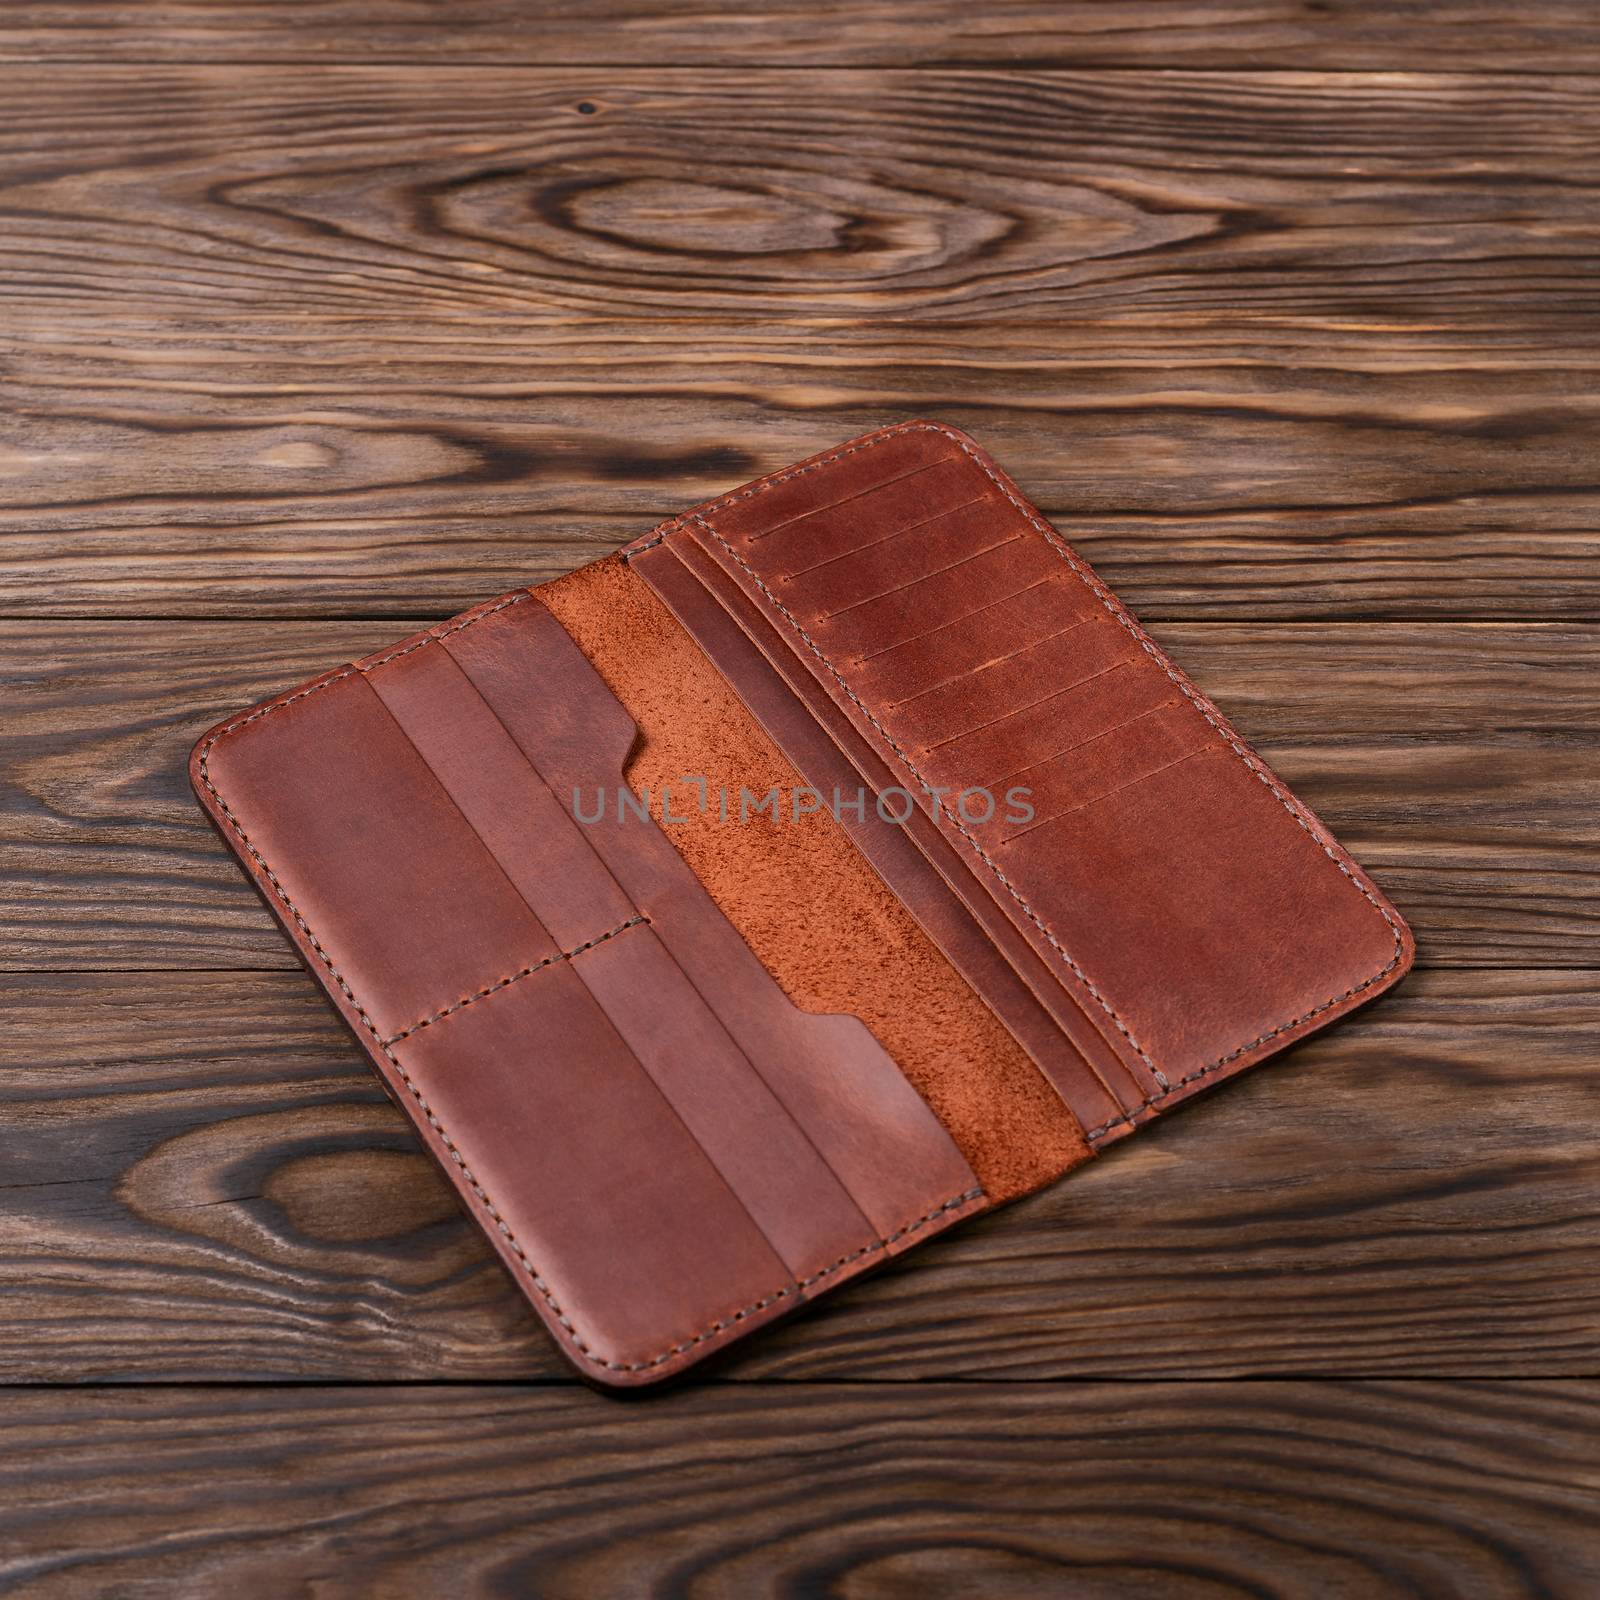 Red color handmade leather porte-monnaie on wooden textured background. Purse is opened and empty. Side view. Stock photo of luxury accessories.